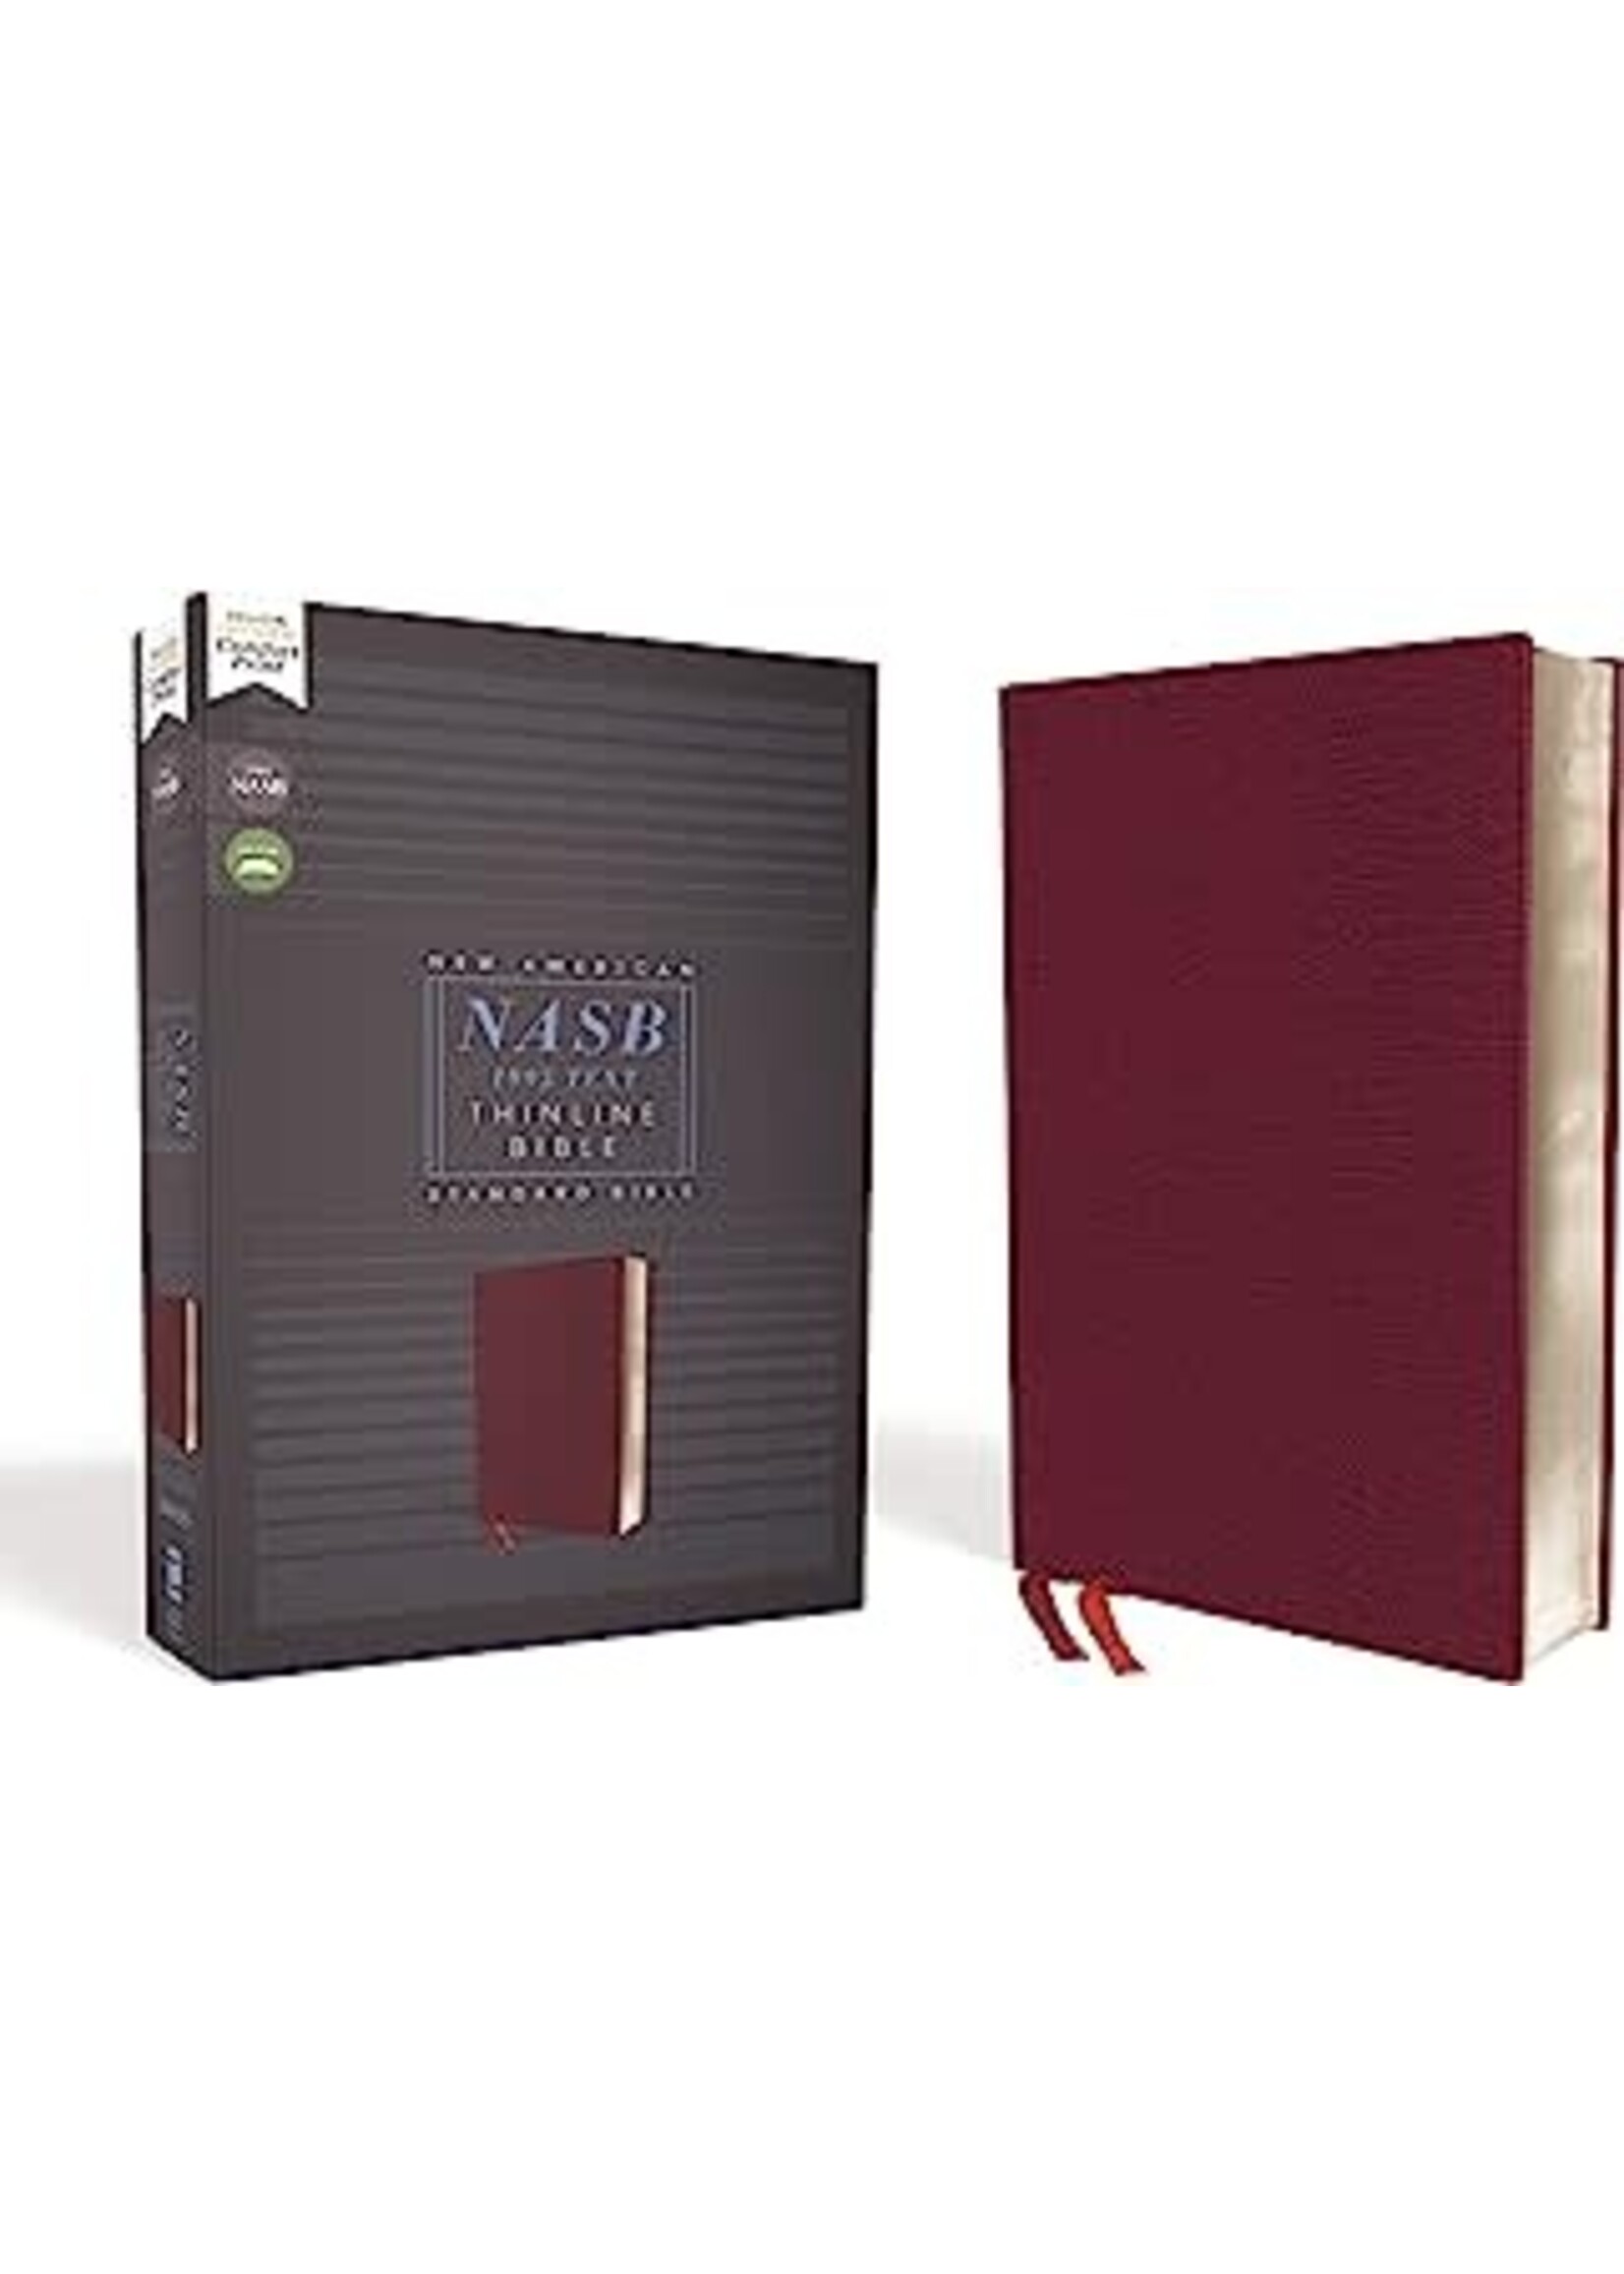 NASB, Thinline Bible, Bonded Leather, Burgundy, Red Letter Edition, 1995 Text, Comfort Print